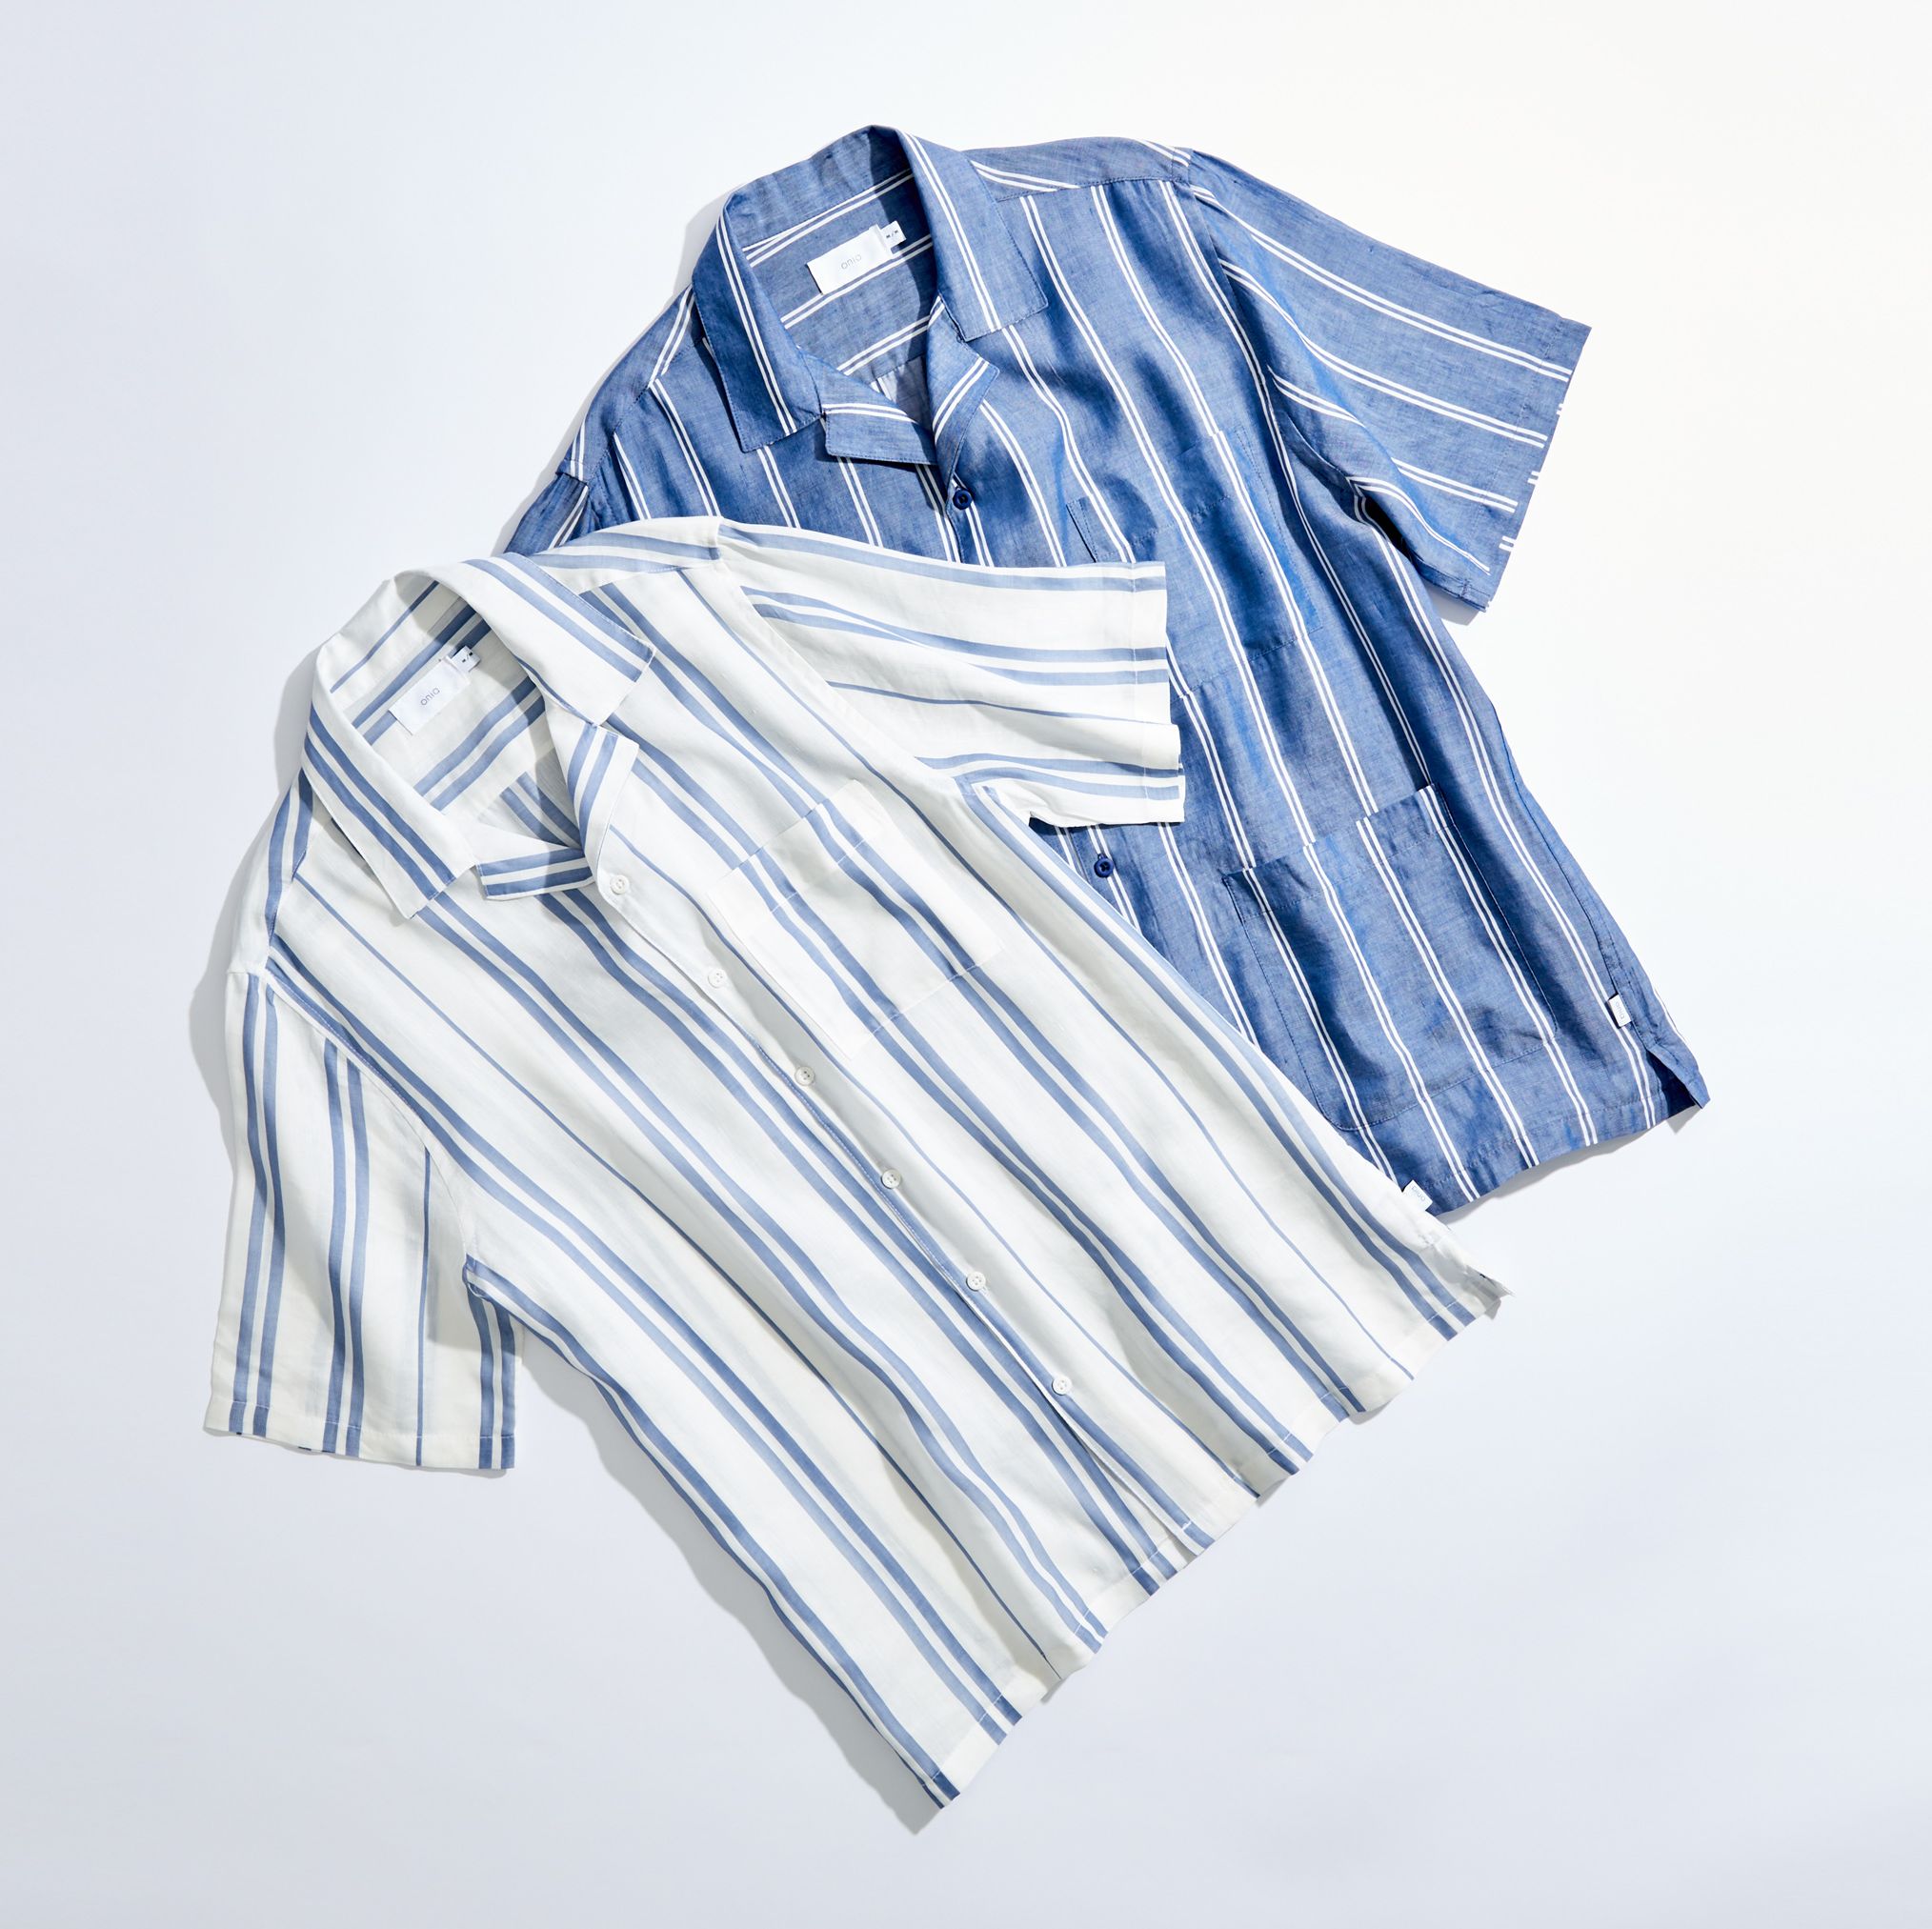 Onia's Camp Shirts Are the Perfect Way to Breeze Into Fall